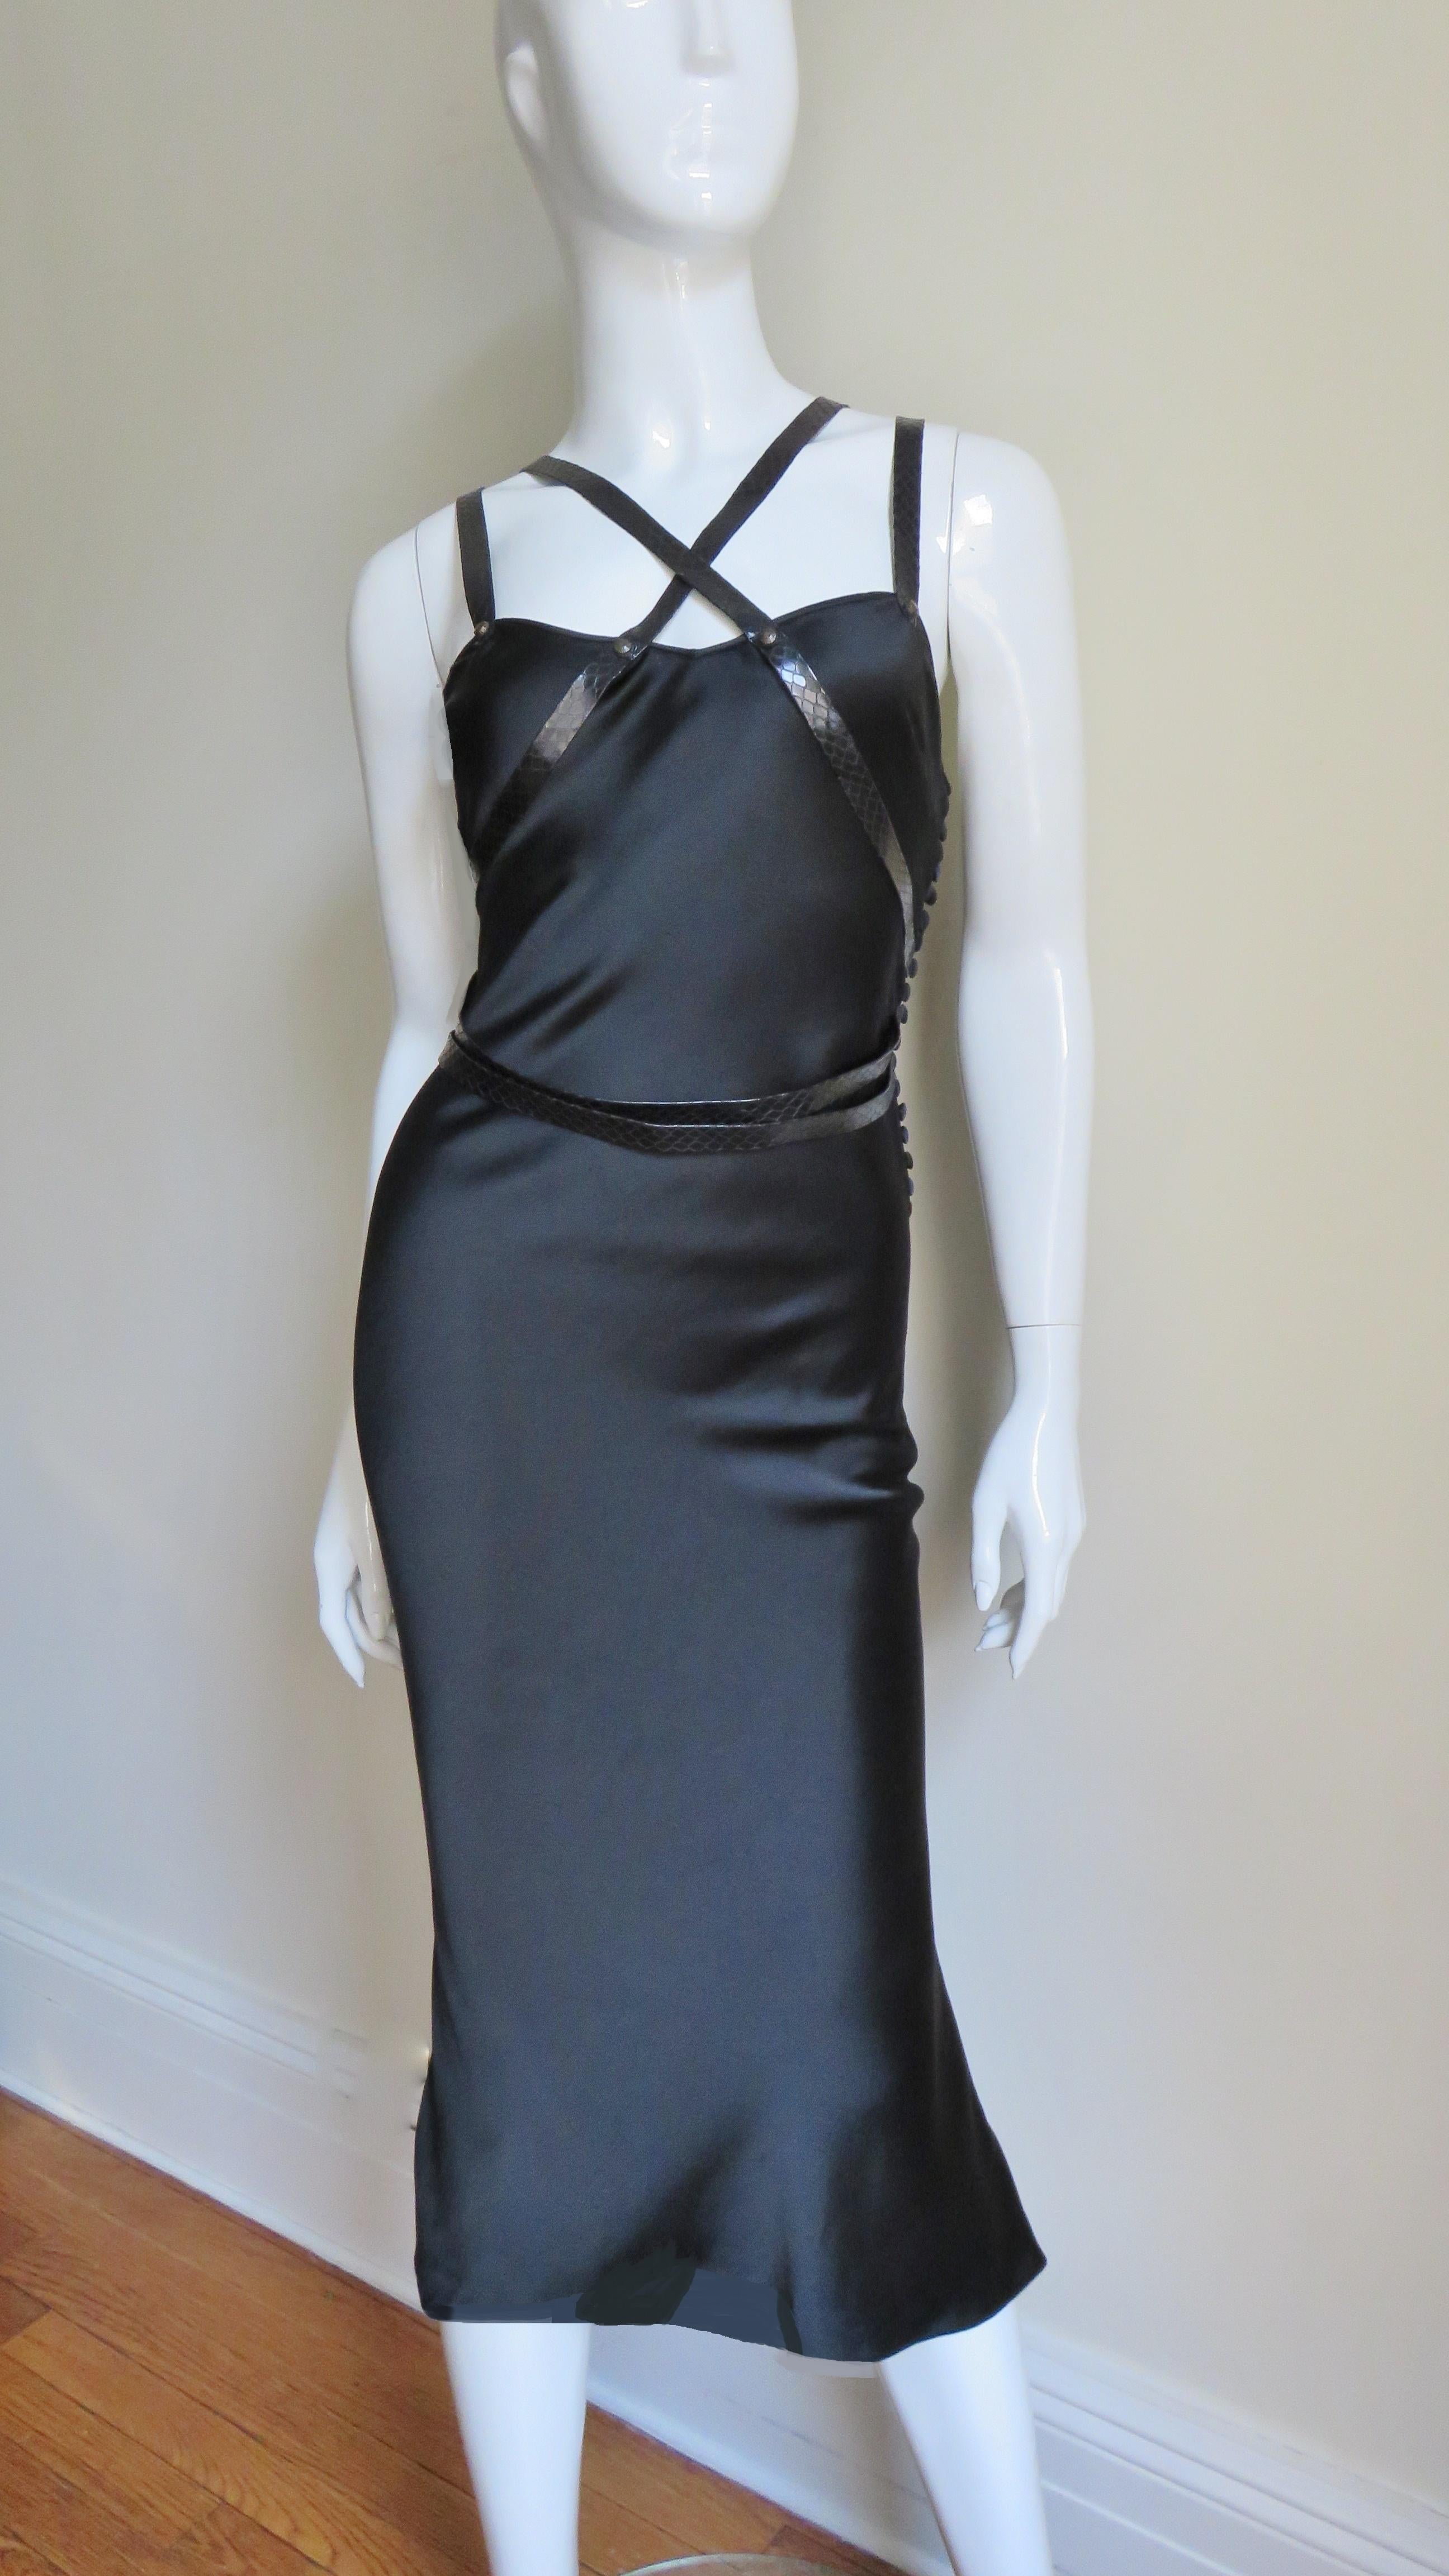 A fabulous black silk dress from Christian Dior. It is a fitted slip style dress adorned with 1/2